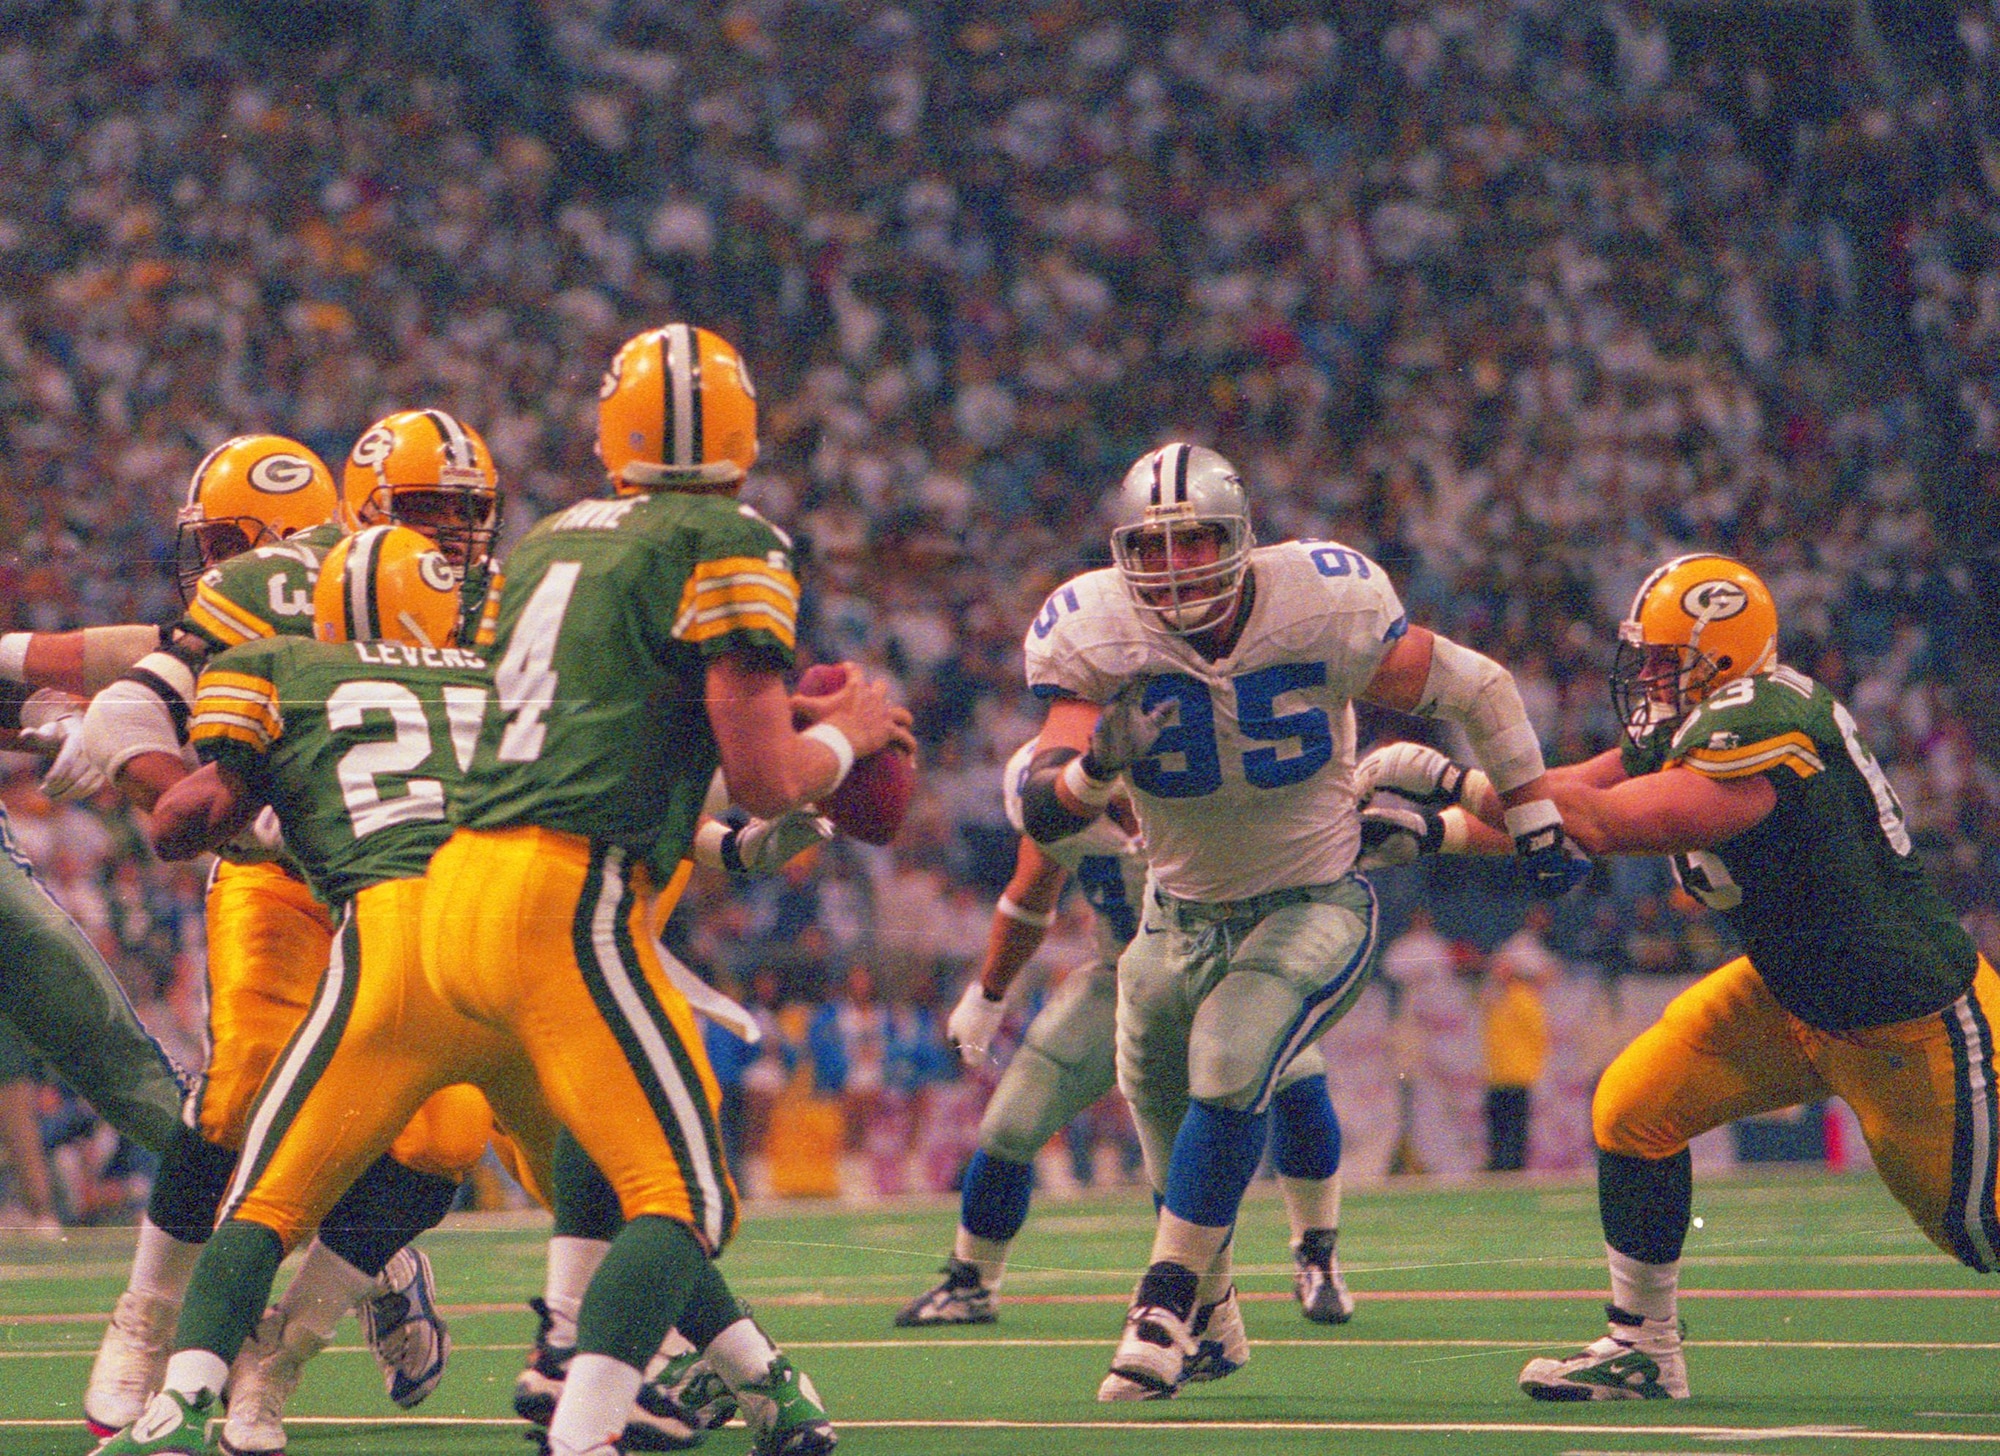 Chad Hennings, center right, played for the Dallas Cowboys for nine seasons. During that time he was part of three Super Bowl winning teams and played in 119 games, recording 27.5 sacks. Before his NFL career, Hennings graduated from the U.S. Air Force Academy in 1988 and went onto pilot training, where he would eventually fly 45 combat sorties over northern Iraq in an A-10 Thunderbolt II during two deployments spanning from 1991 and early 1992. (Photo courtesy/Dallas Cowboys)